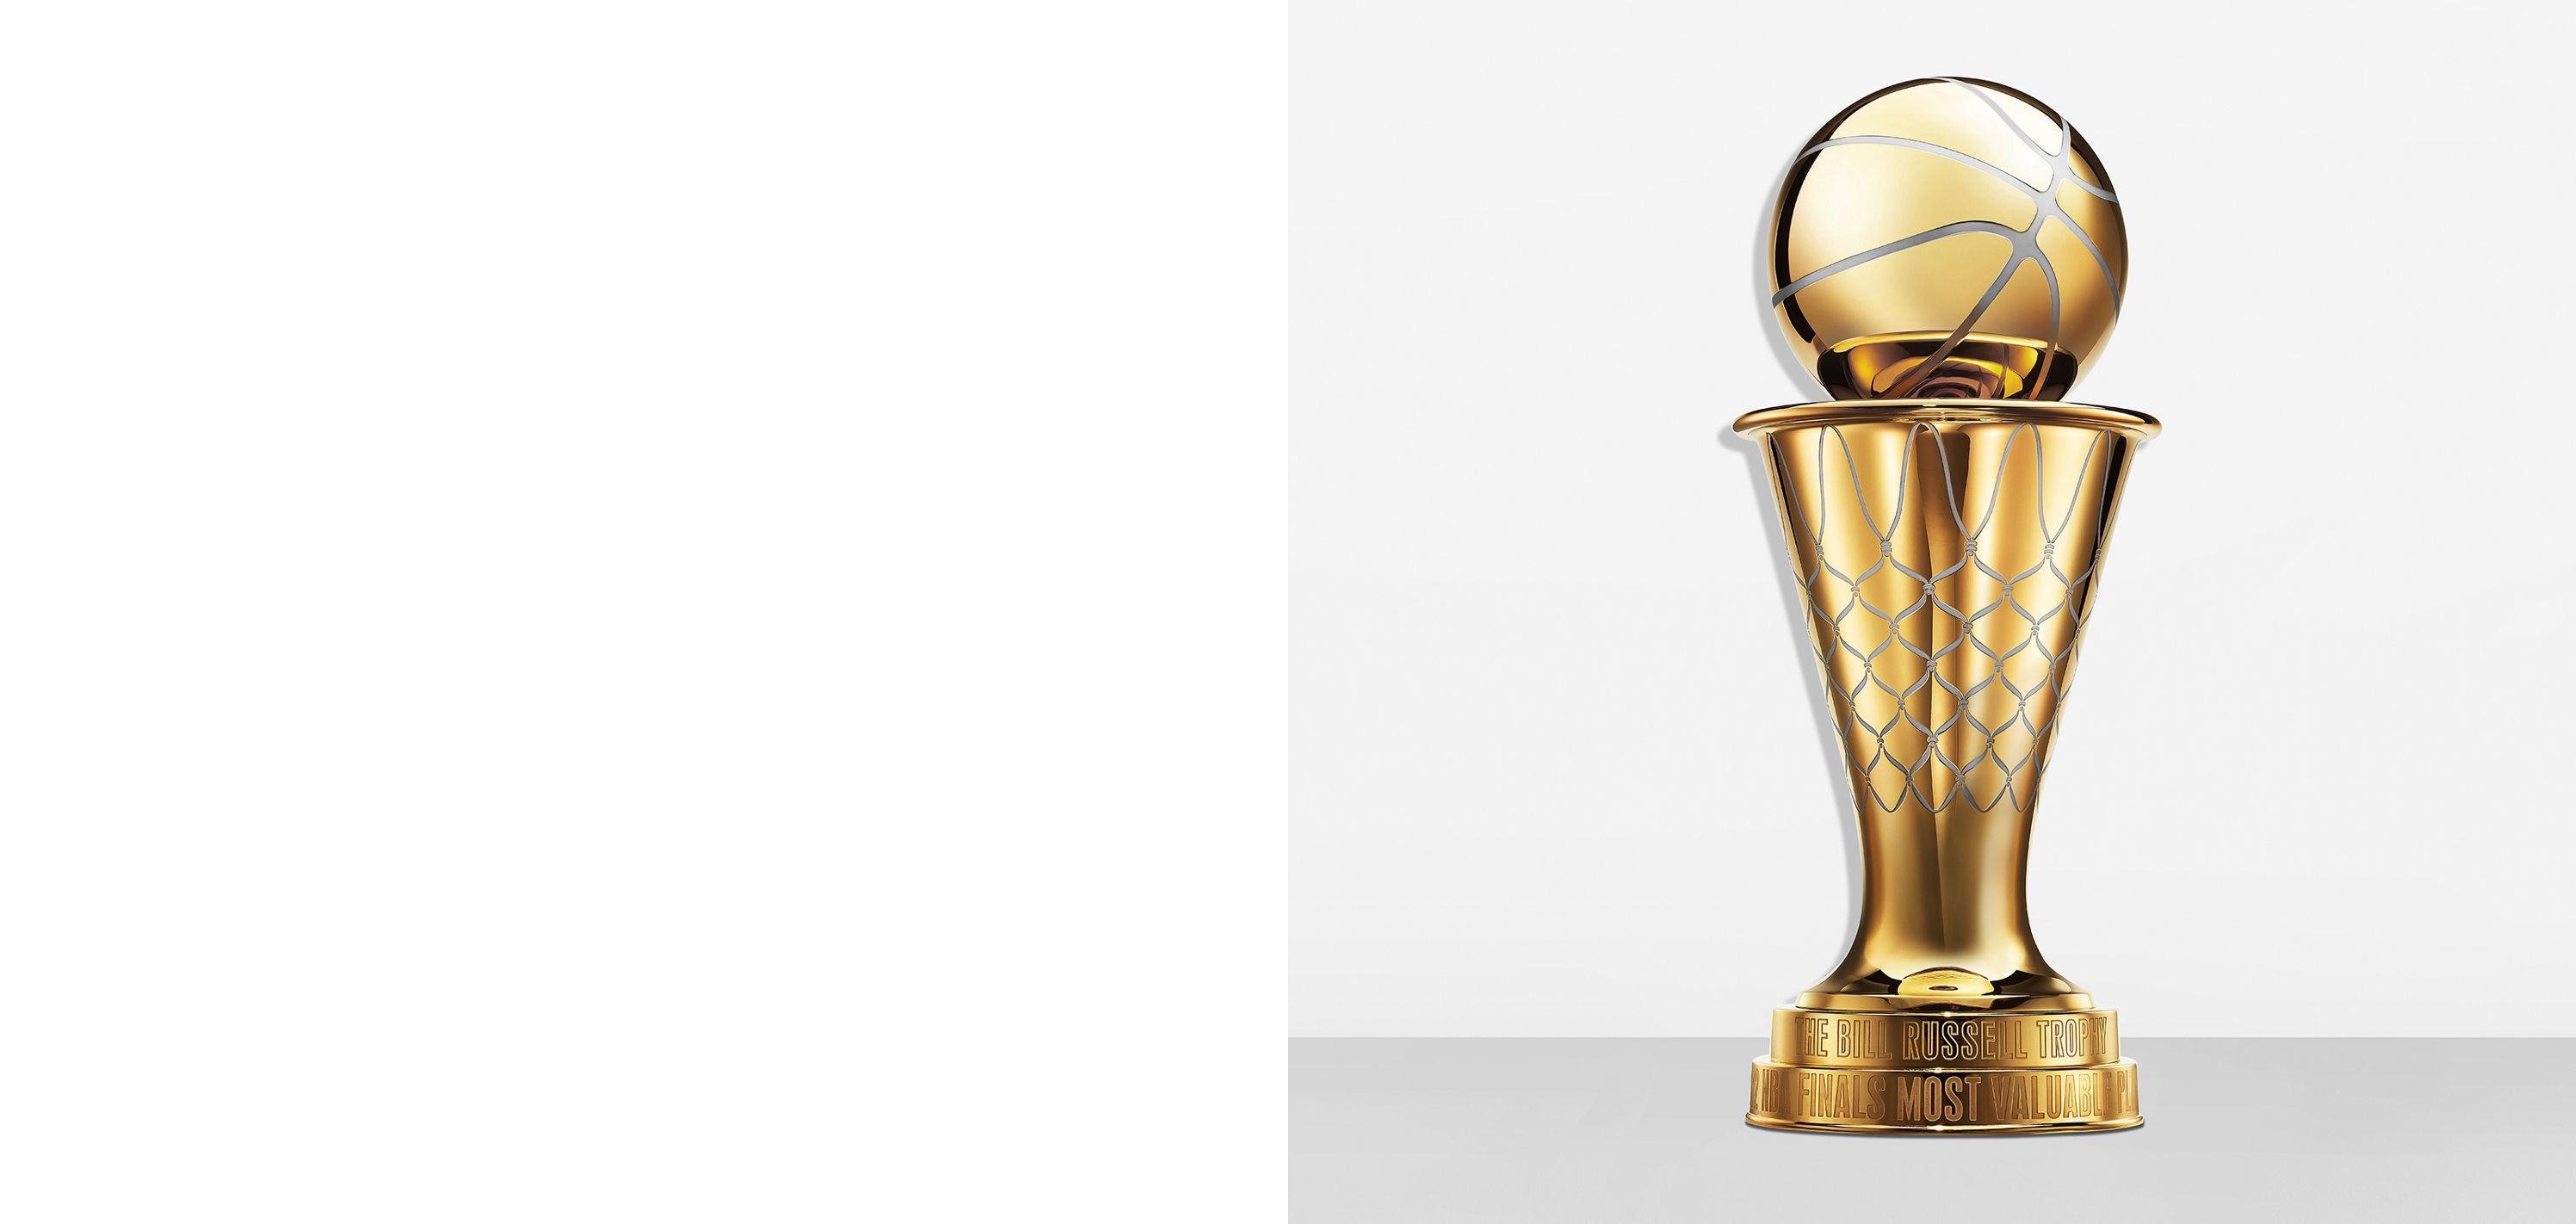 Tiffany & Co is redesigning the esports trophy for Worlds